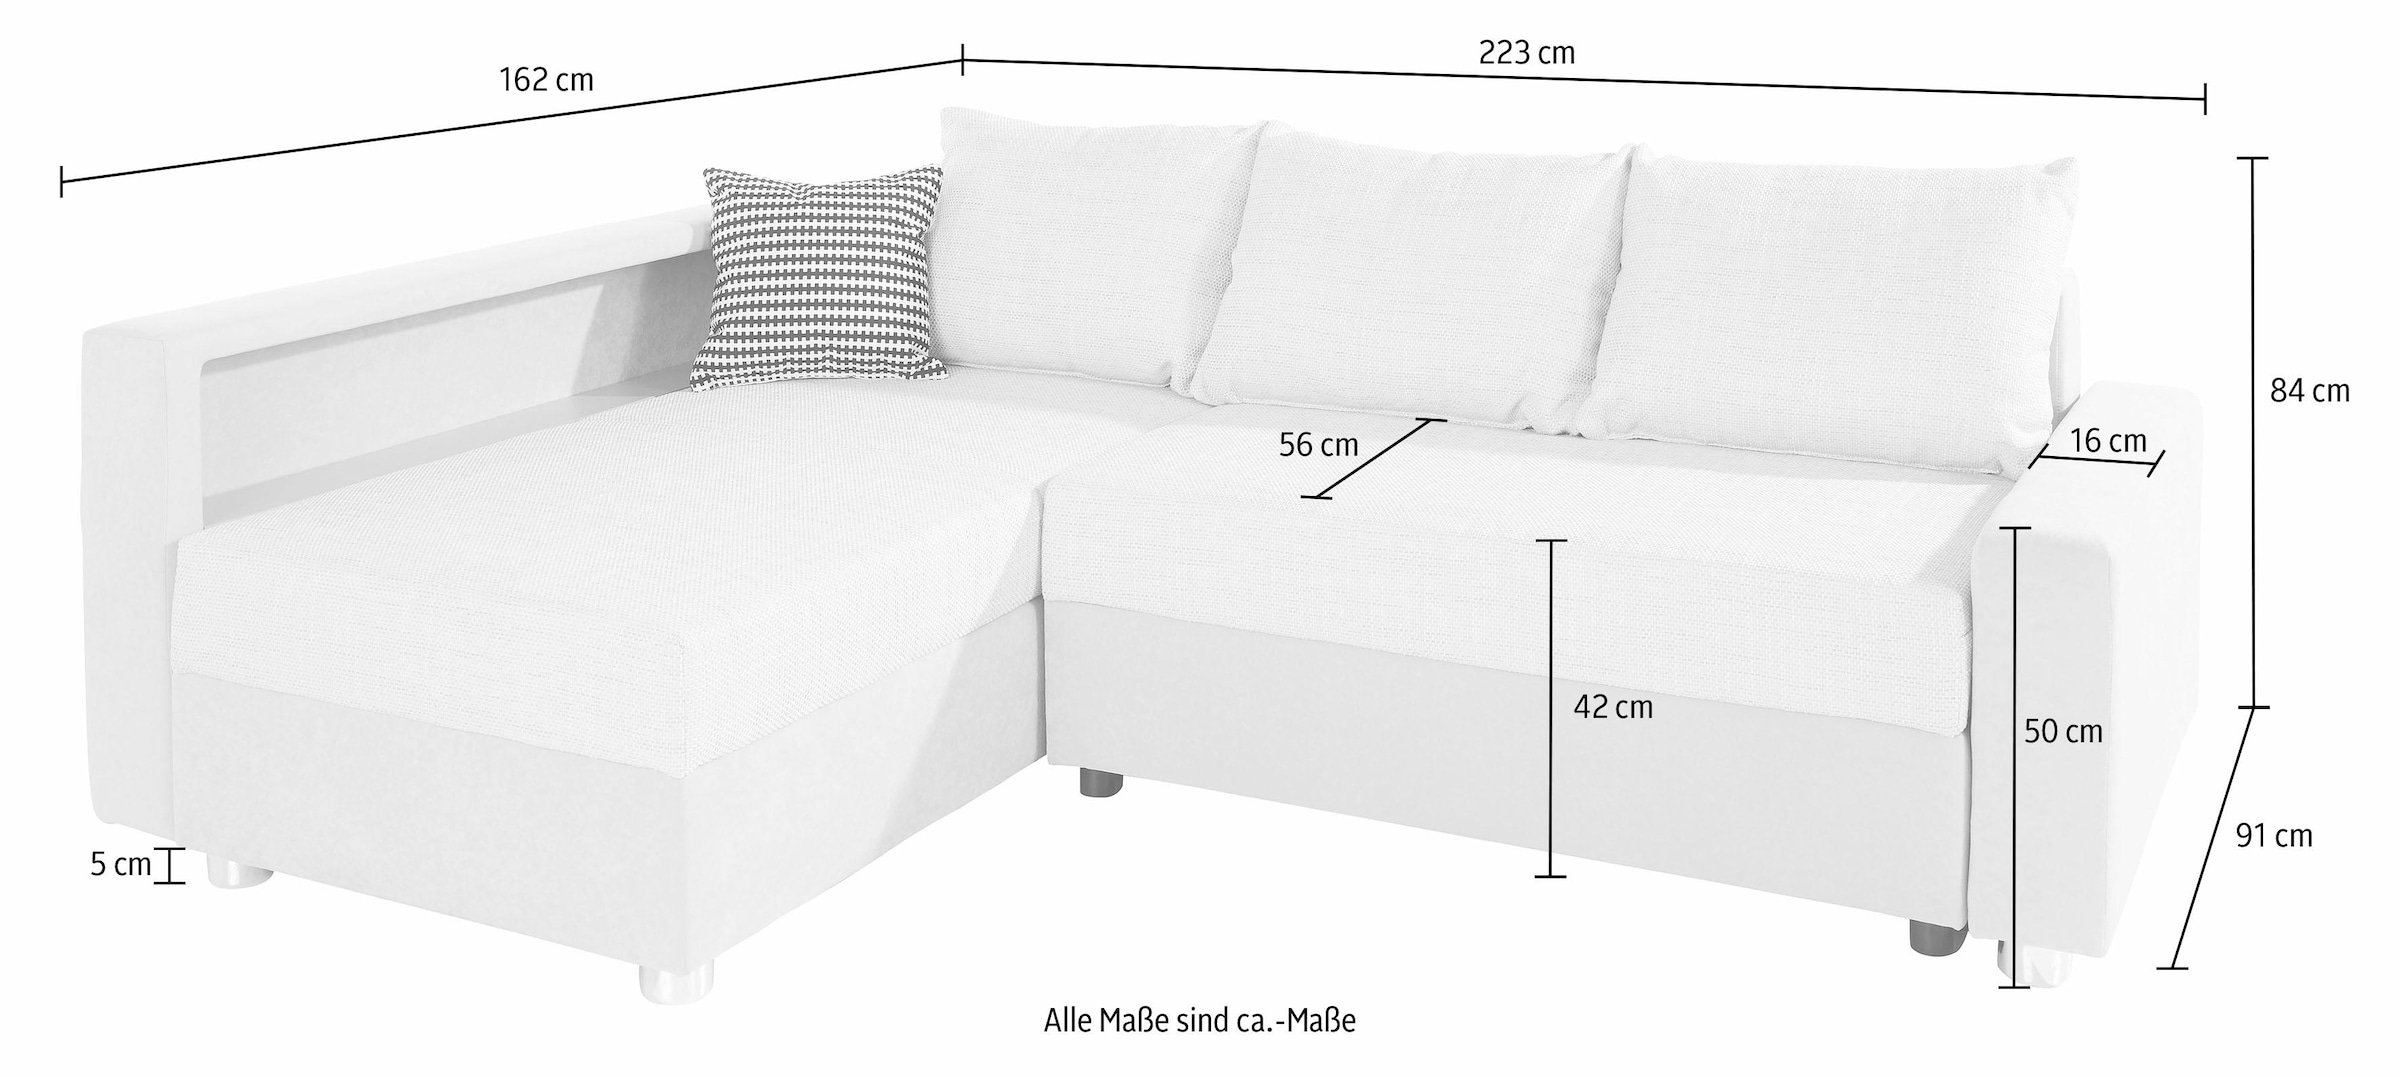 COLLECTION AB Ecksofa »Relax«, inklusive Bettfunktion, Federkern, wahlweise  mit RGB-LED-Beleuchtung